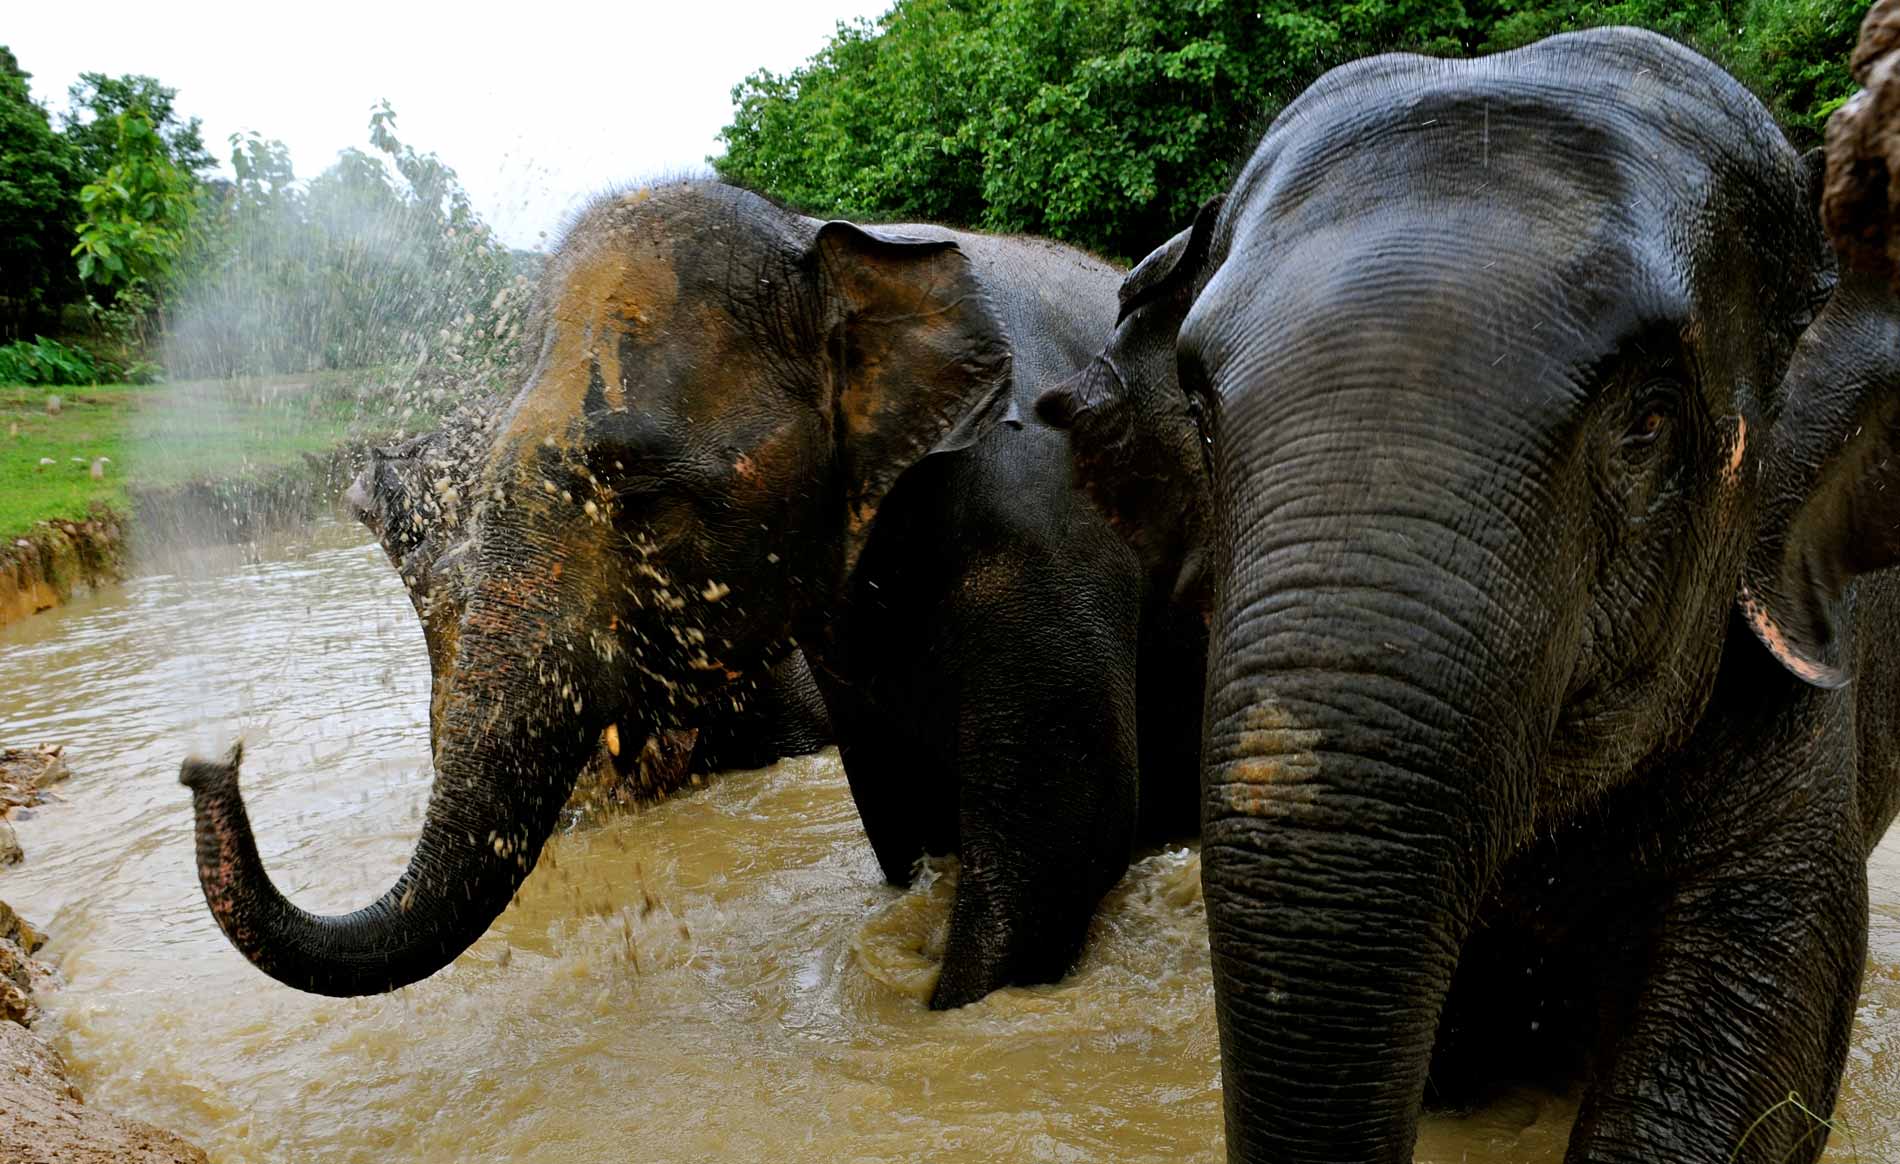 At Boon Lott's Elephant Sanctuary, Mali can enjoy bathing and playing in the water.